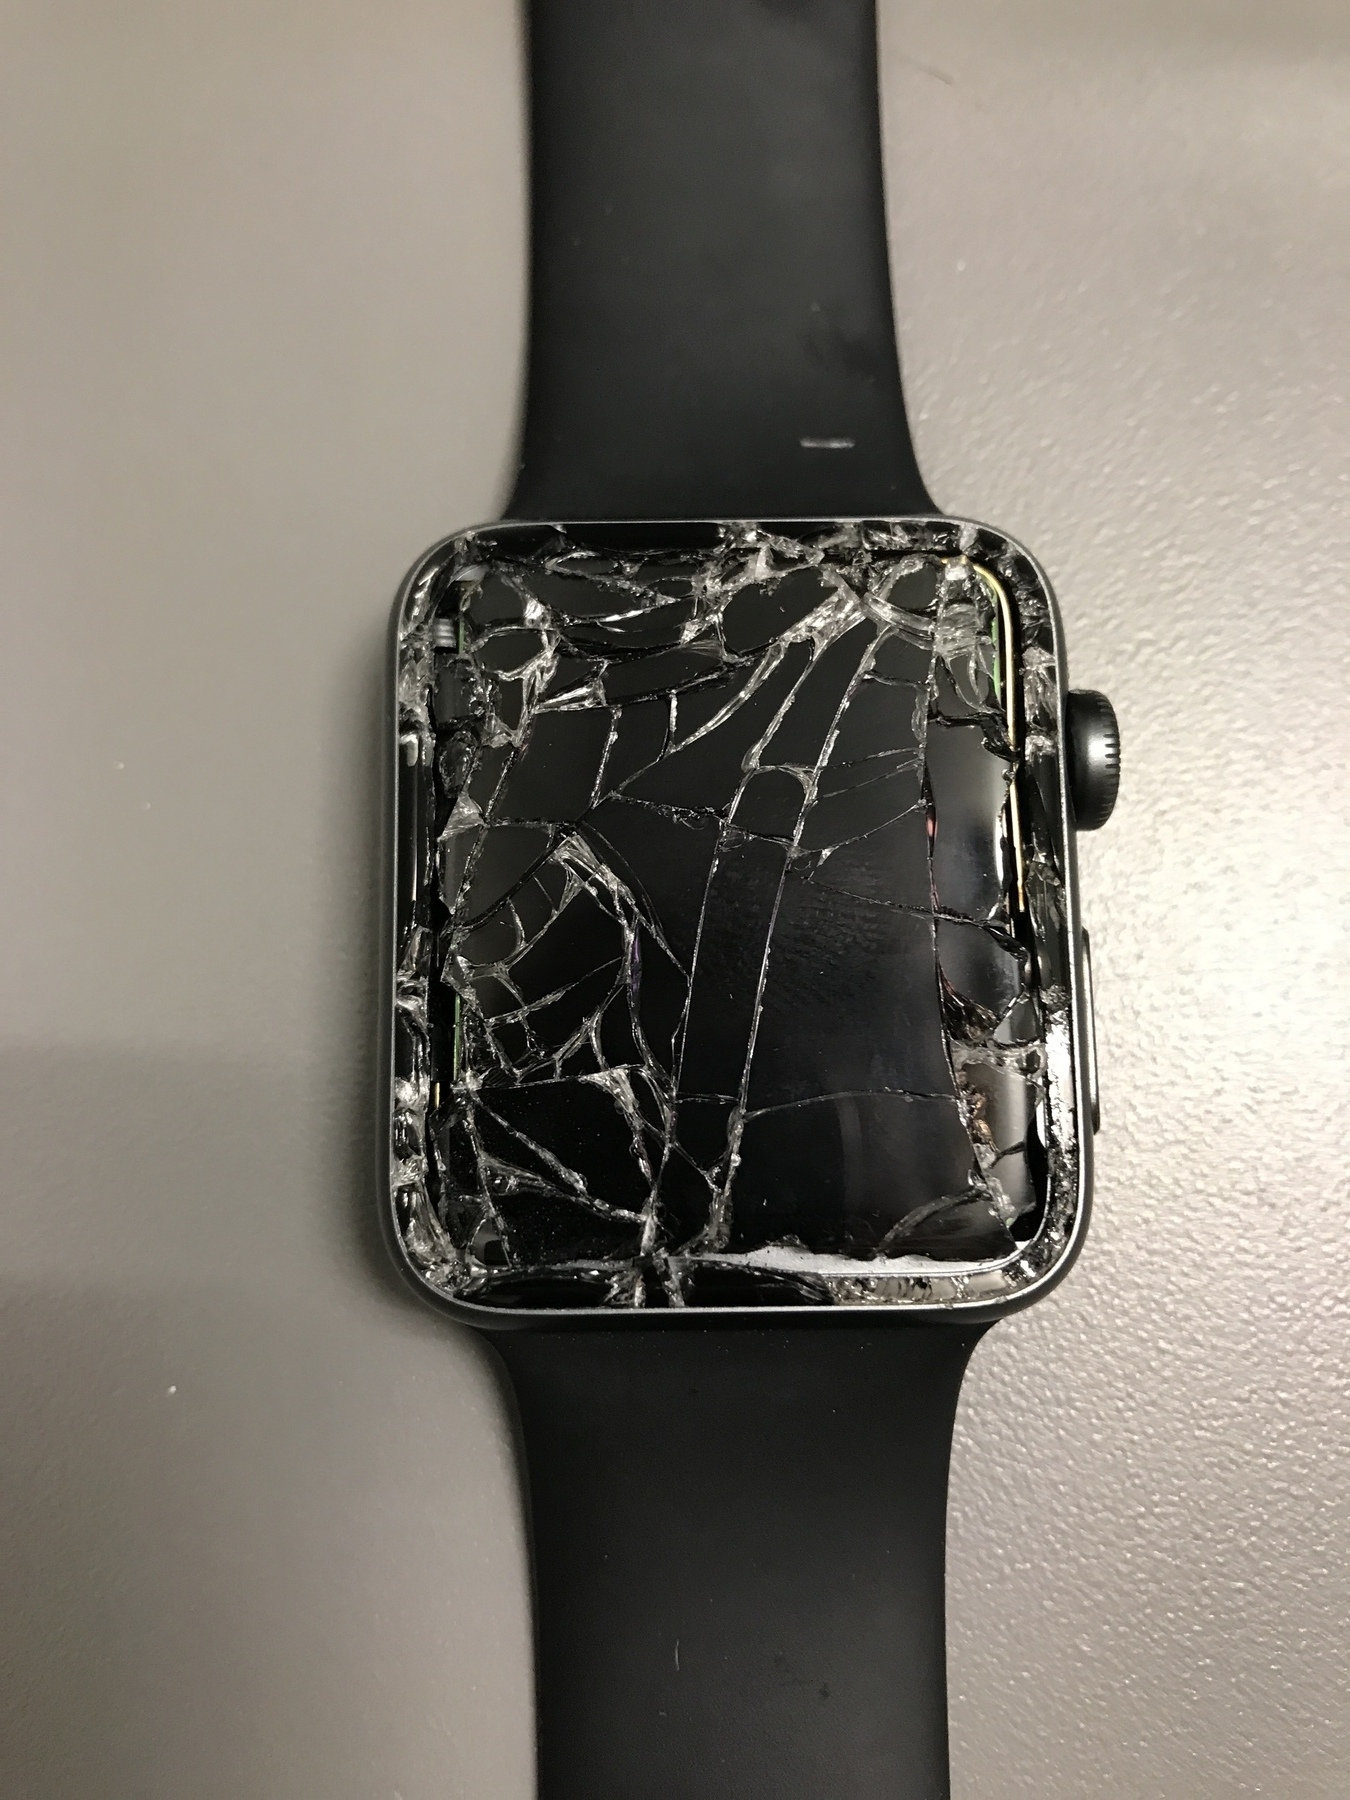 Smashed and cracked Apple Watch